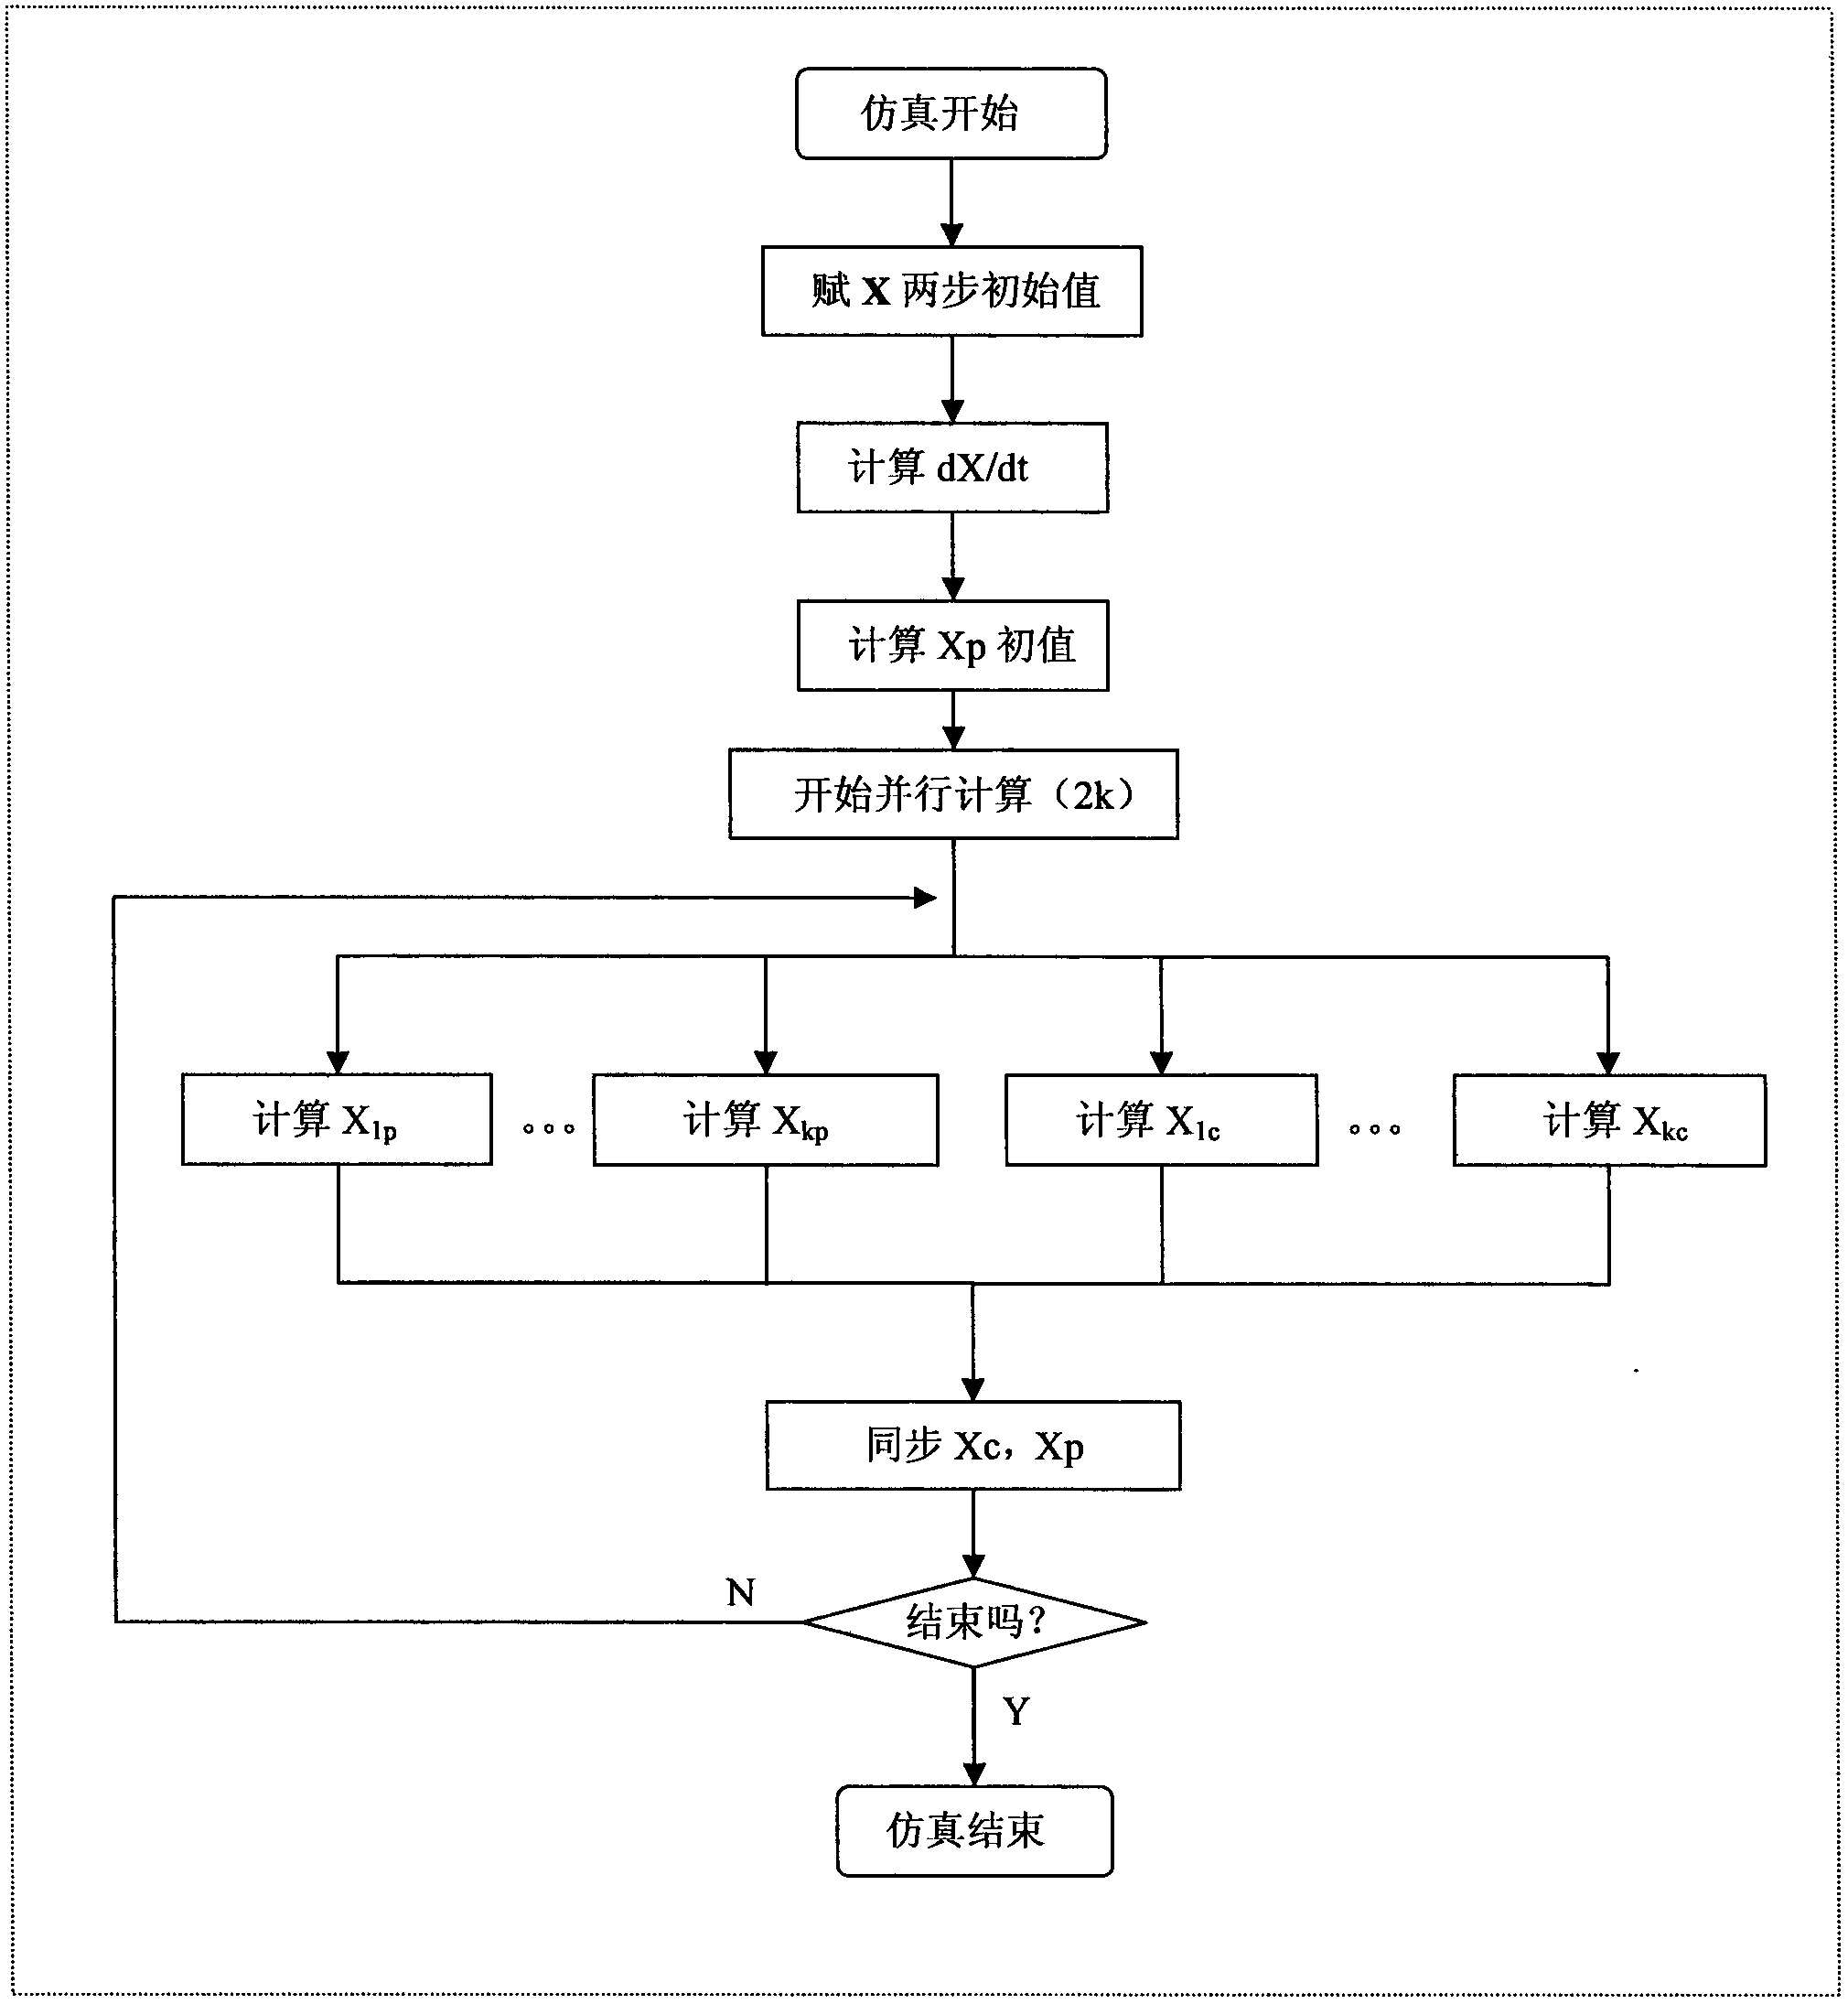 Test method for achieving electromagnetic transient real-time simulation of electrical power system based on CUDA (compute unified device architecture) parallel computing